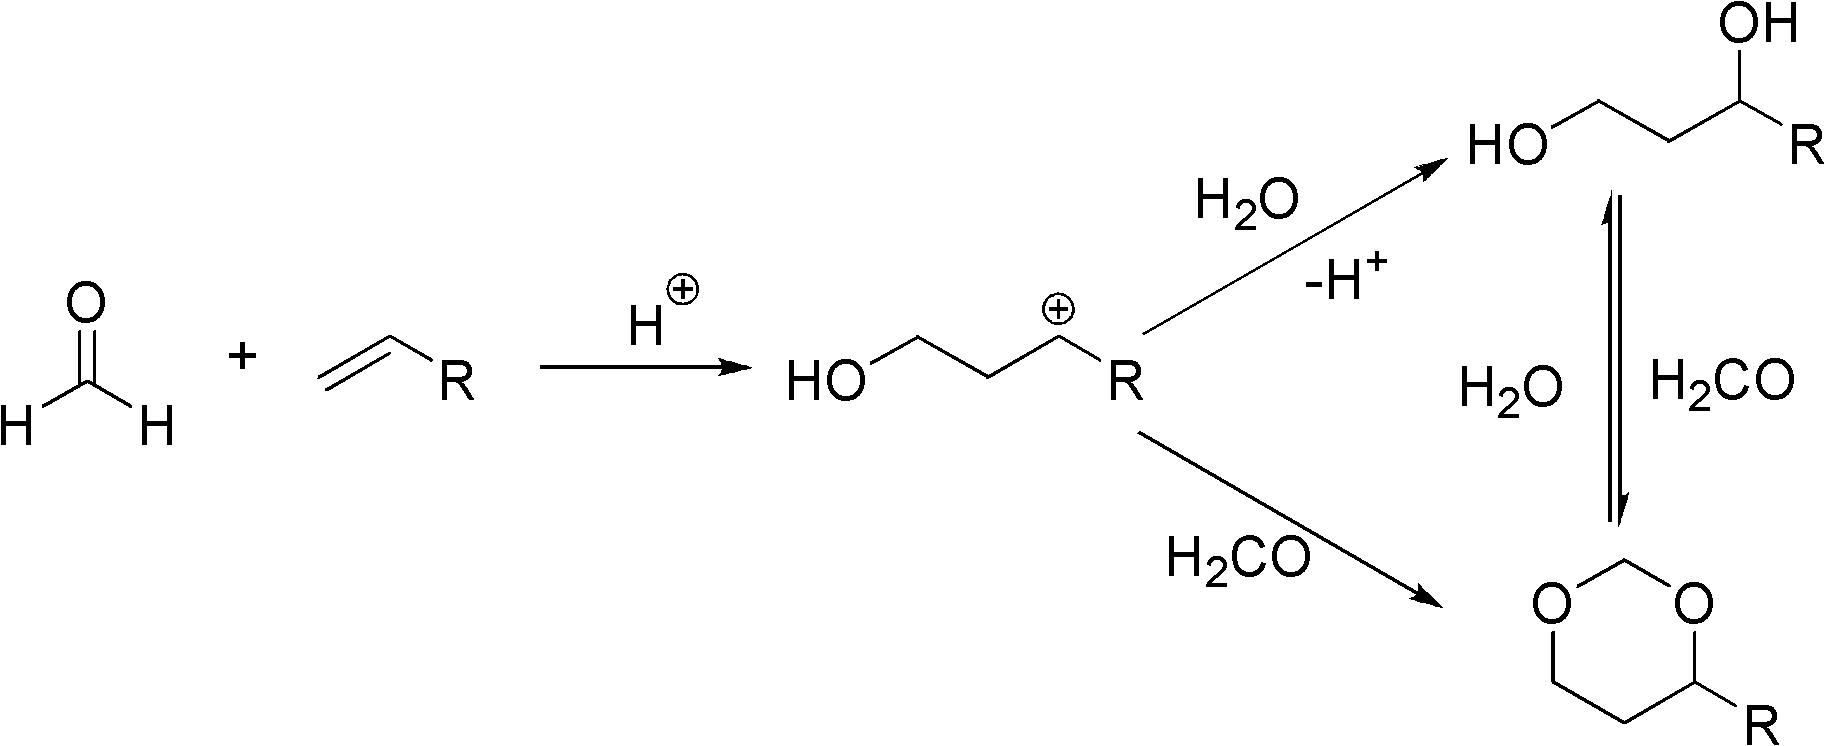 Method for preparing 1,3-dihydric alcohol directly from olefin